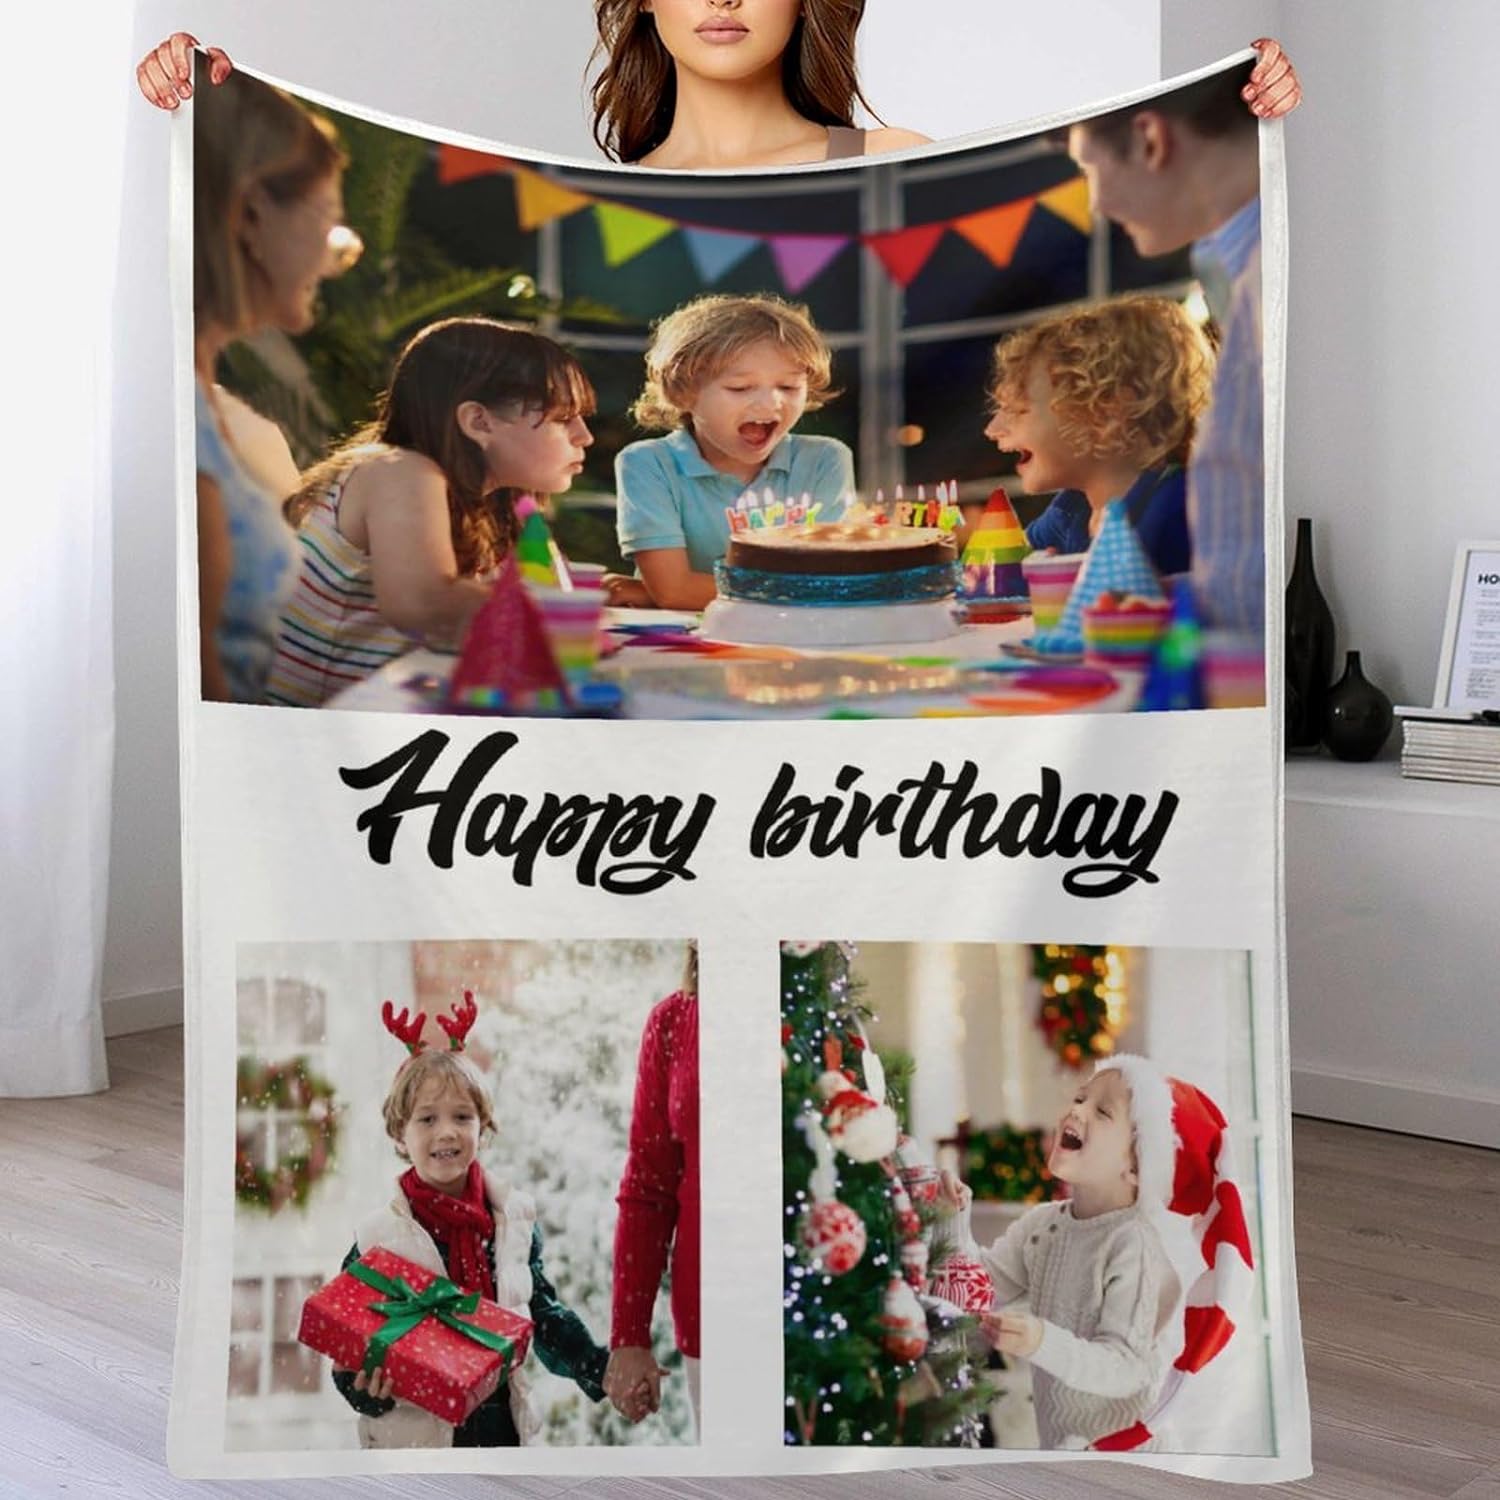 AISENIN Custom Blanket Personalized Customized Blanket Design Photo Text Picture Birthday Souvenir Gifts Make A Customized Throw Blanket for Kids/Adults/Family/Friend (Custom 3 Photos)